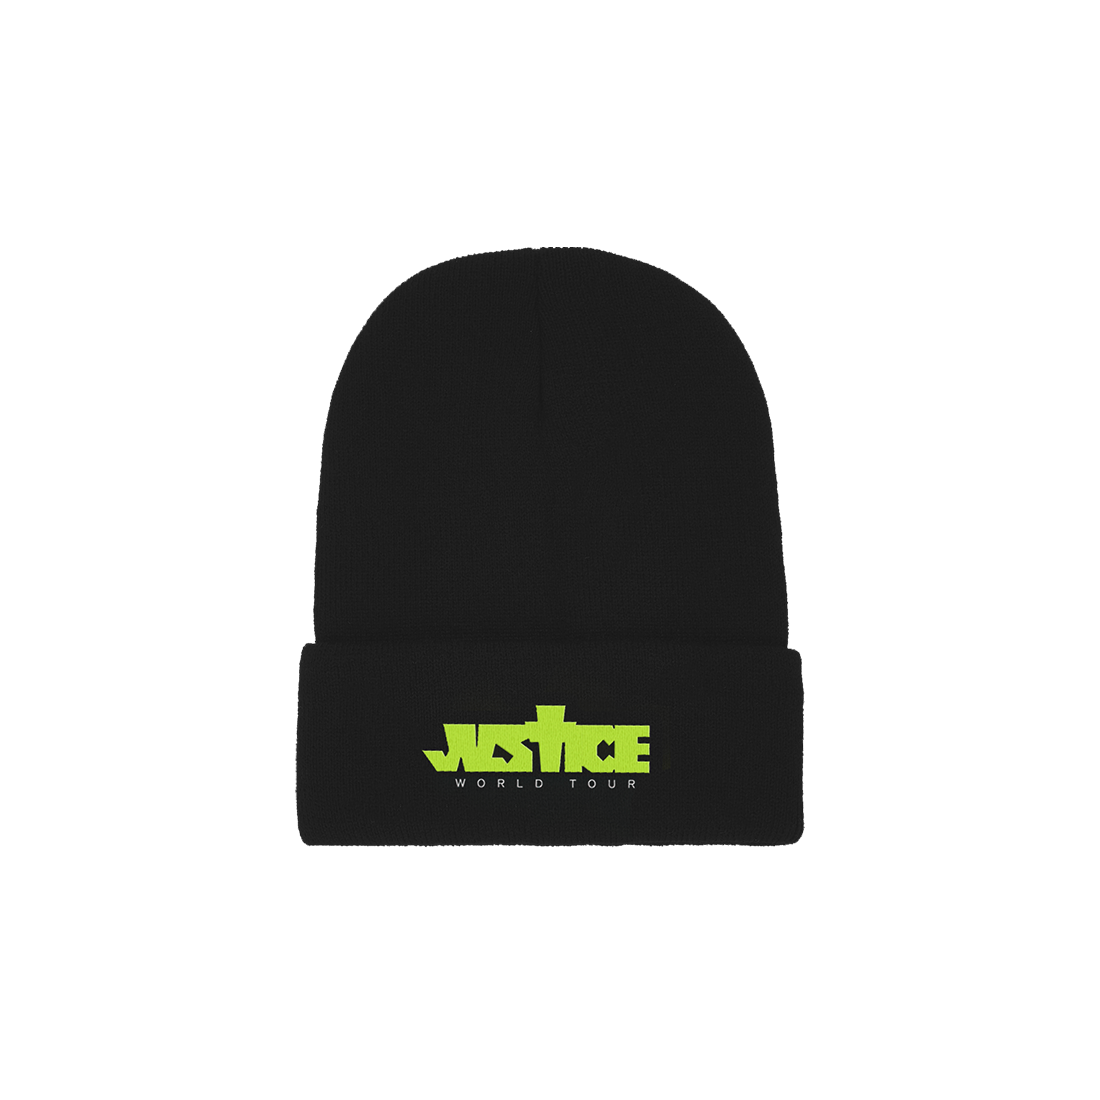 JUSTICE WORLD TOUR Bieber - CHARITY EXCLUSIVE Shop Justin JB BEANIE – 